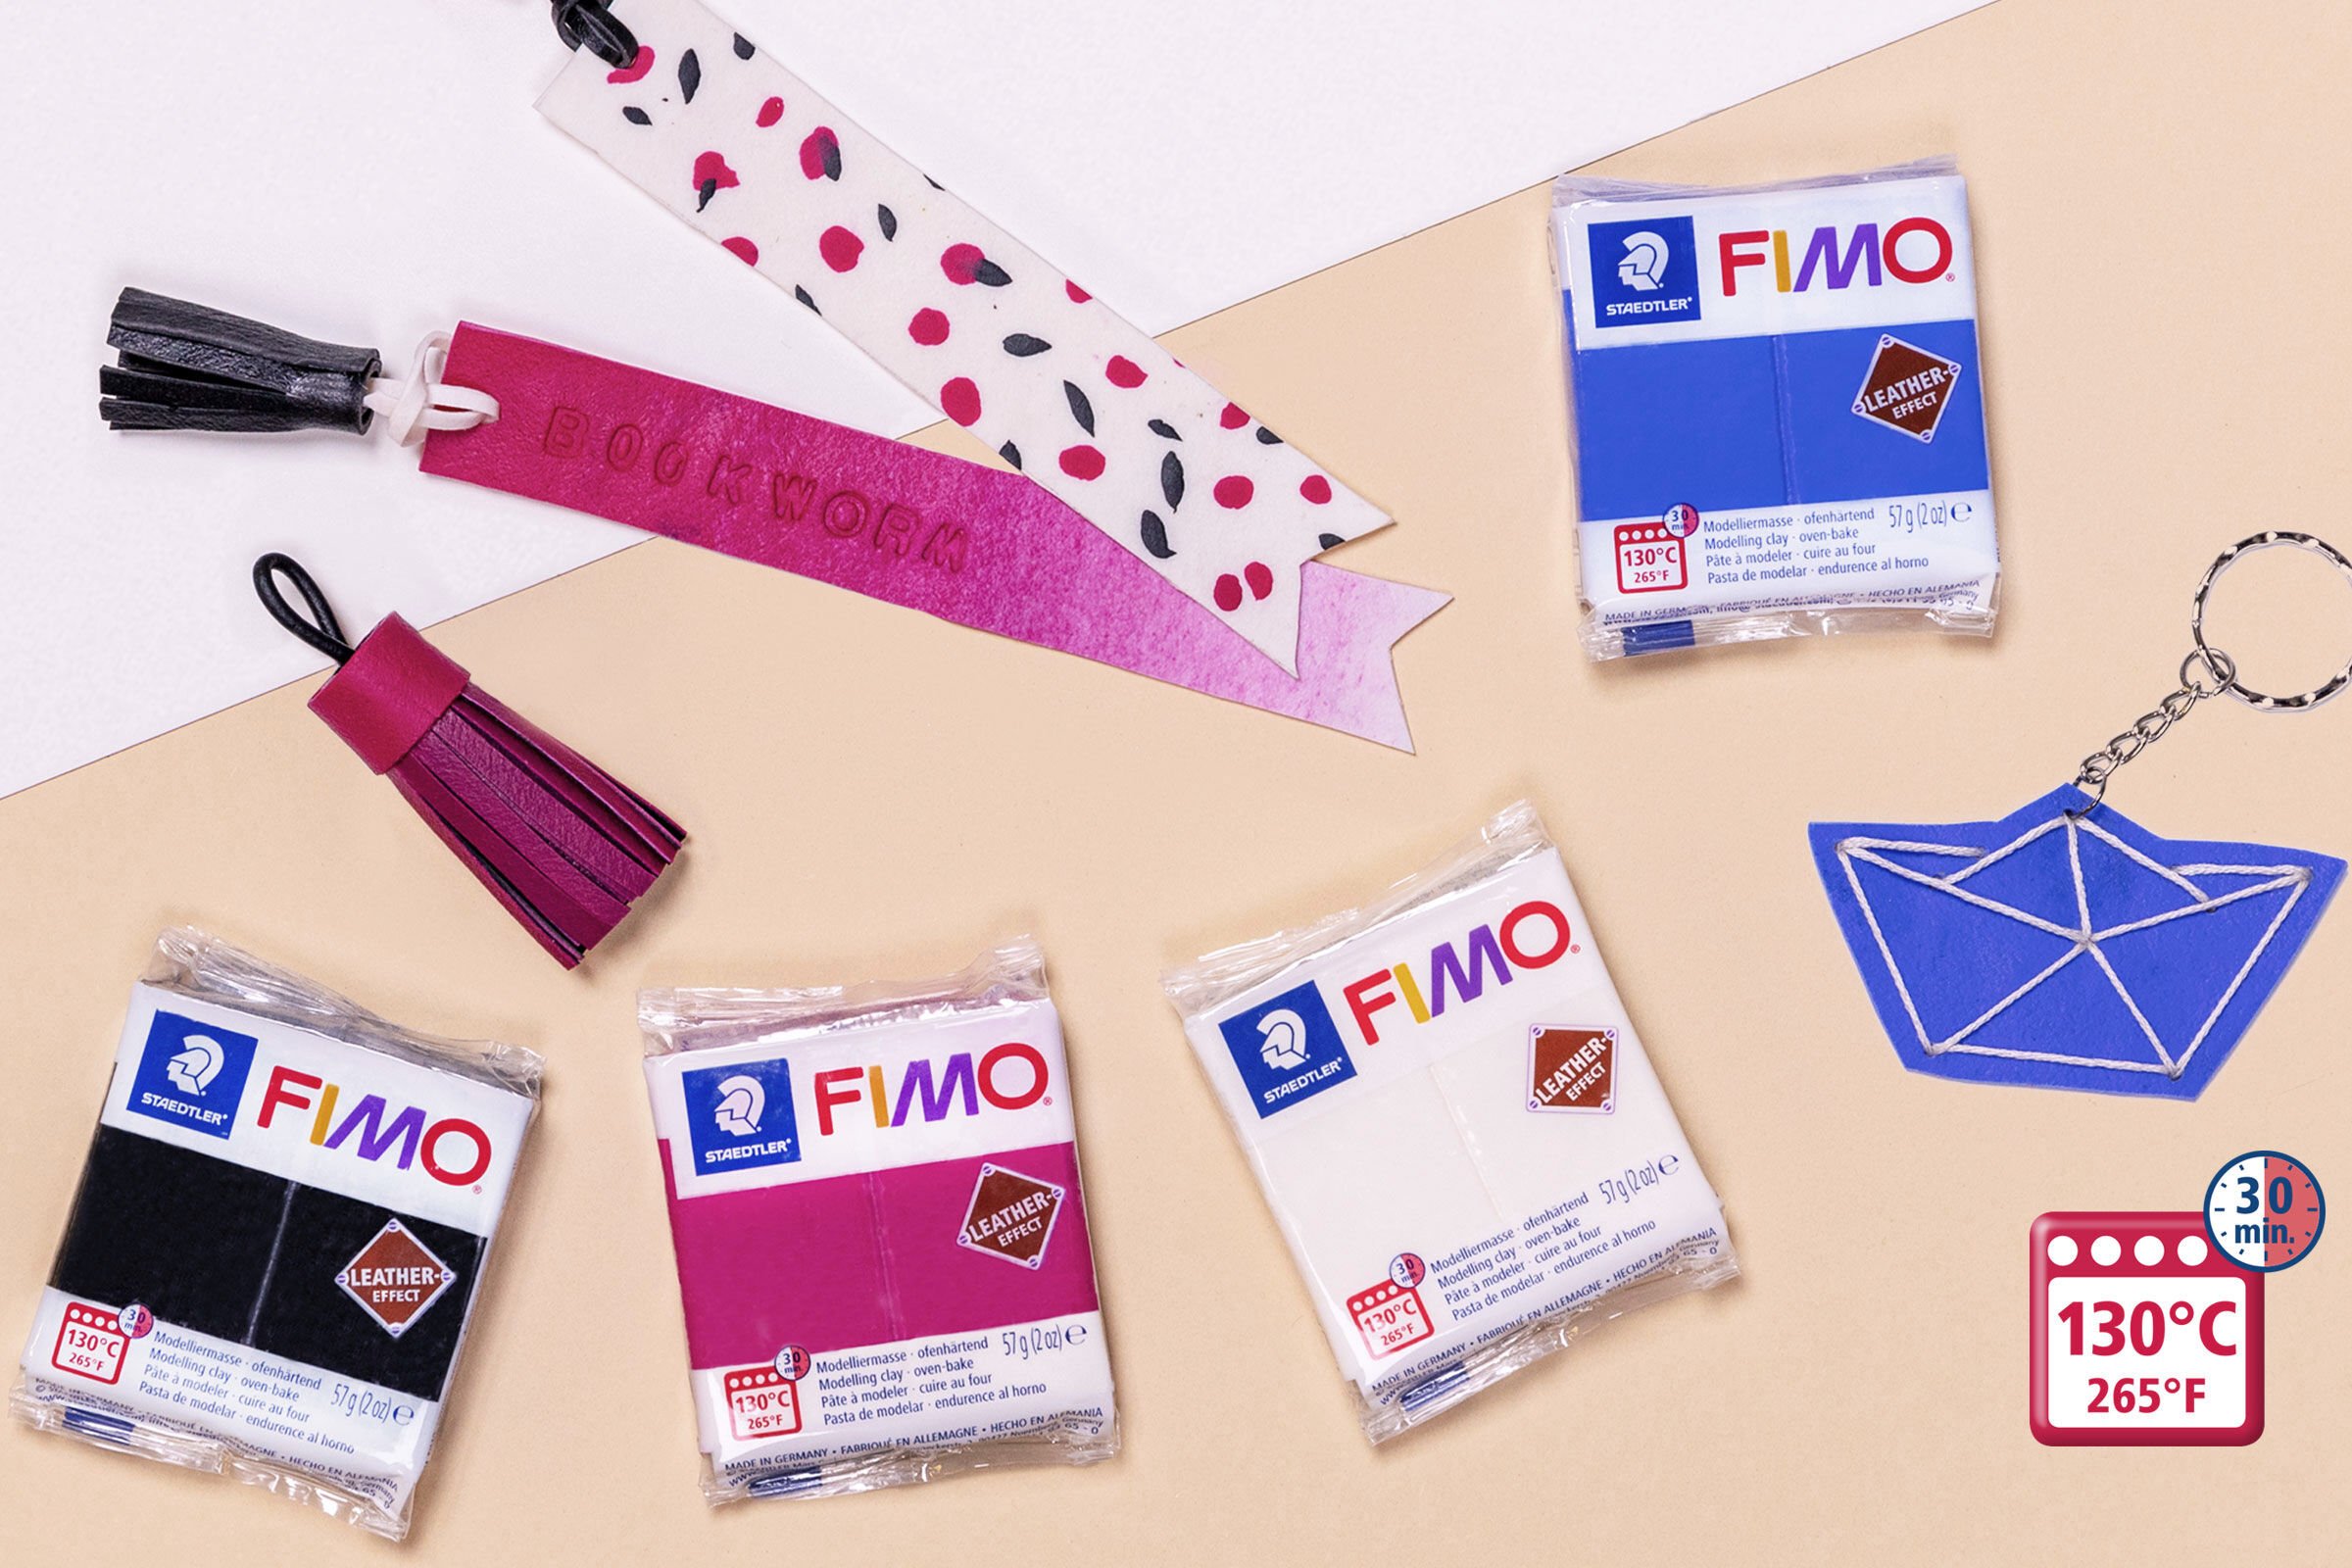 FIMO Genuine FIMO® Leather-Effect Polymer Modelling Oven Bake Clay 57g Many Colors 